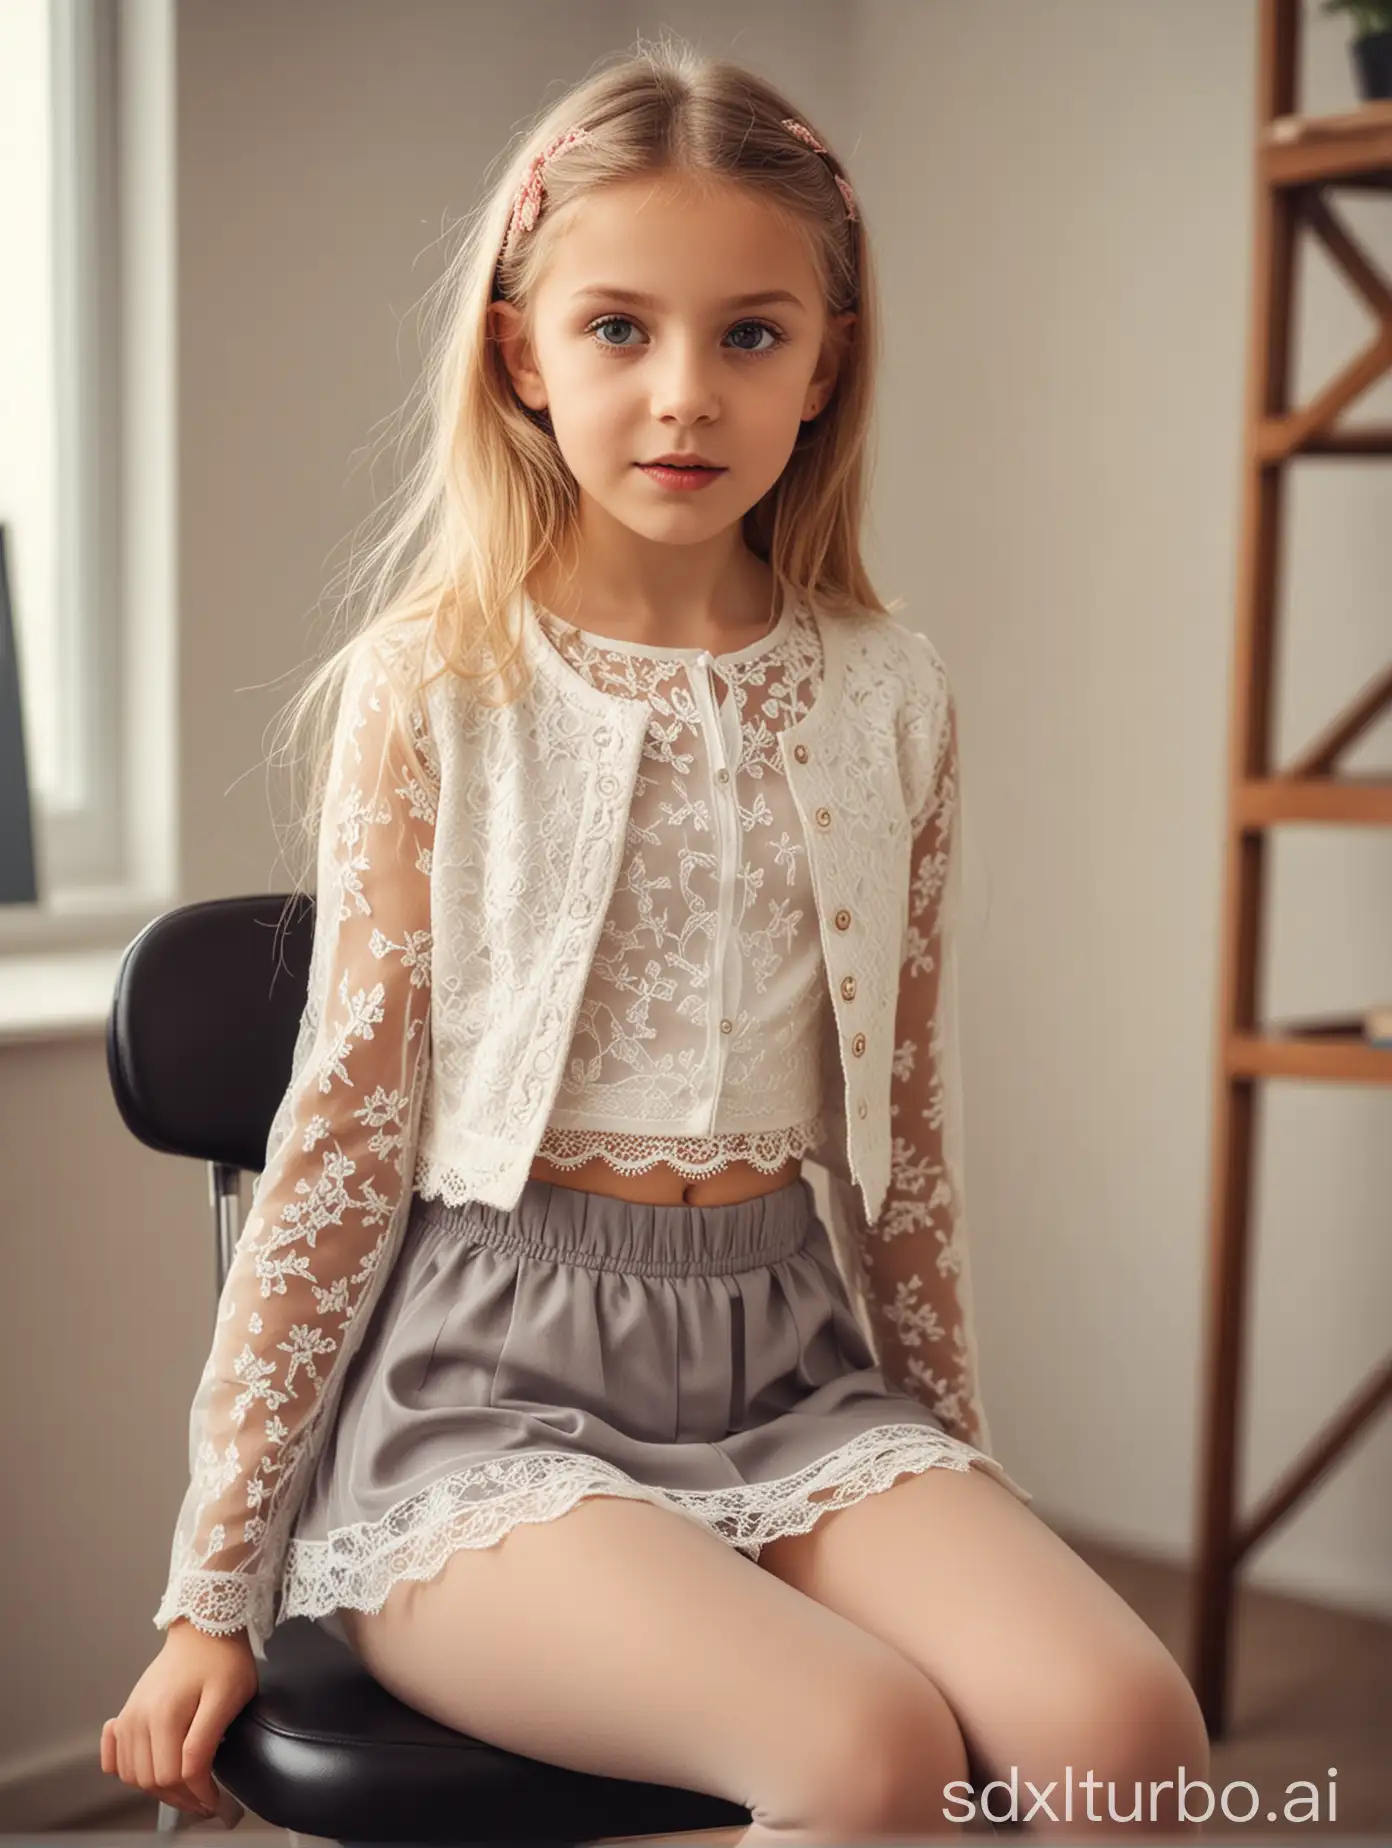 Young-Girl-in-Office-Setting-with-Fashionable-Attire